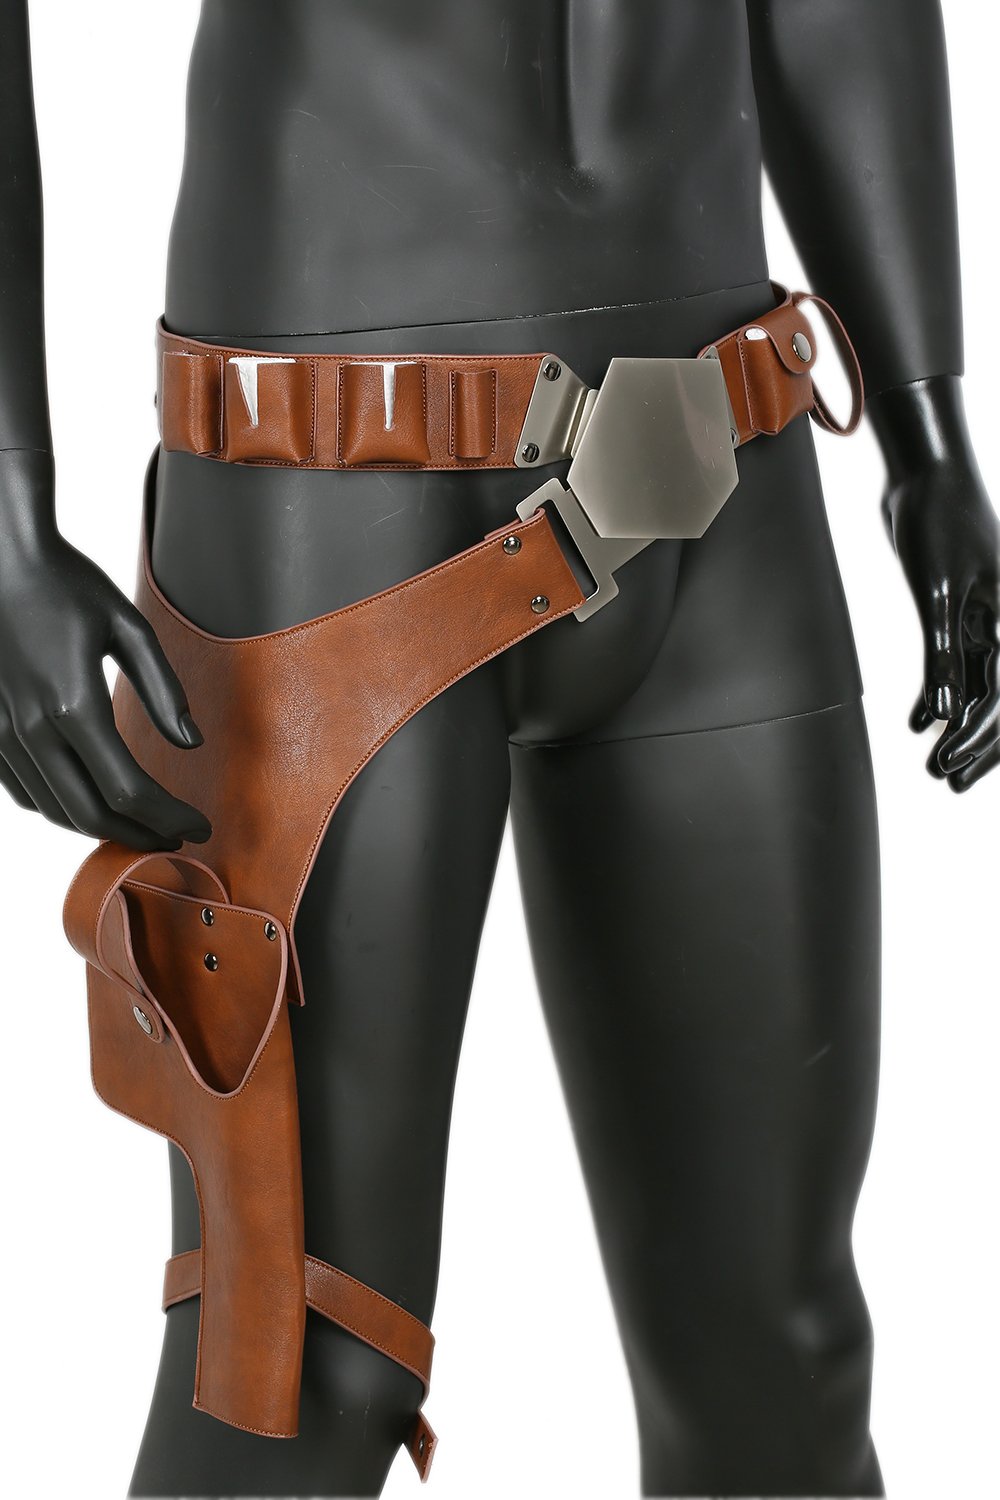 Han Solo Cosplay Belt Holster Pu Leather Costume Accessories Props